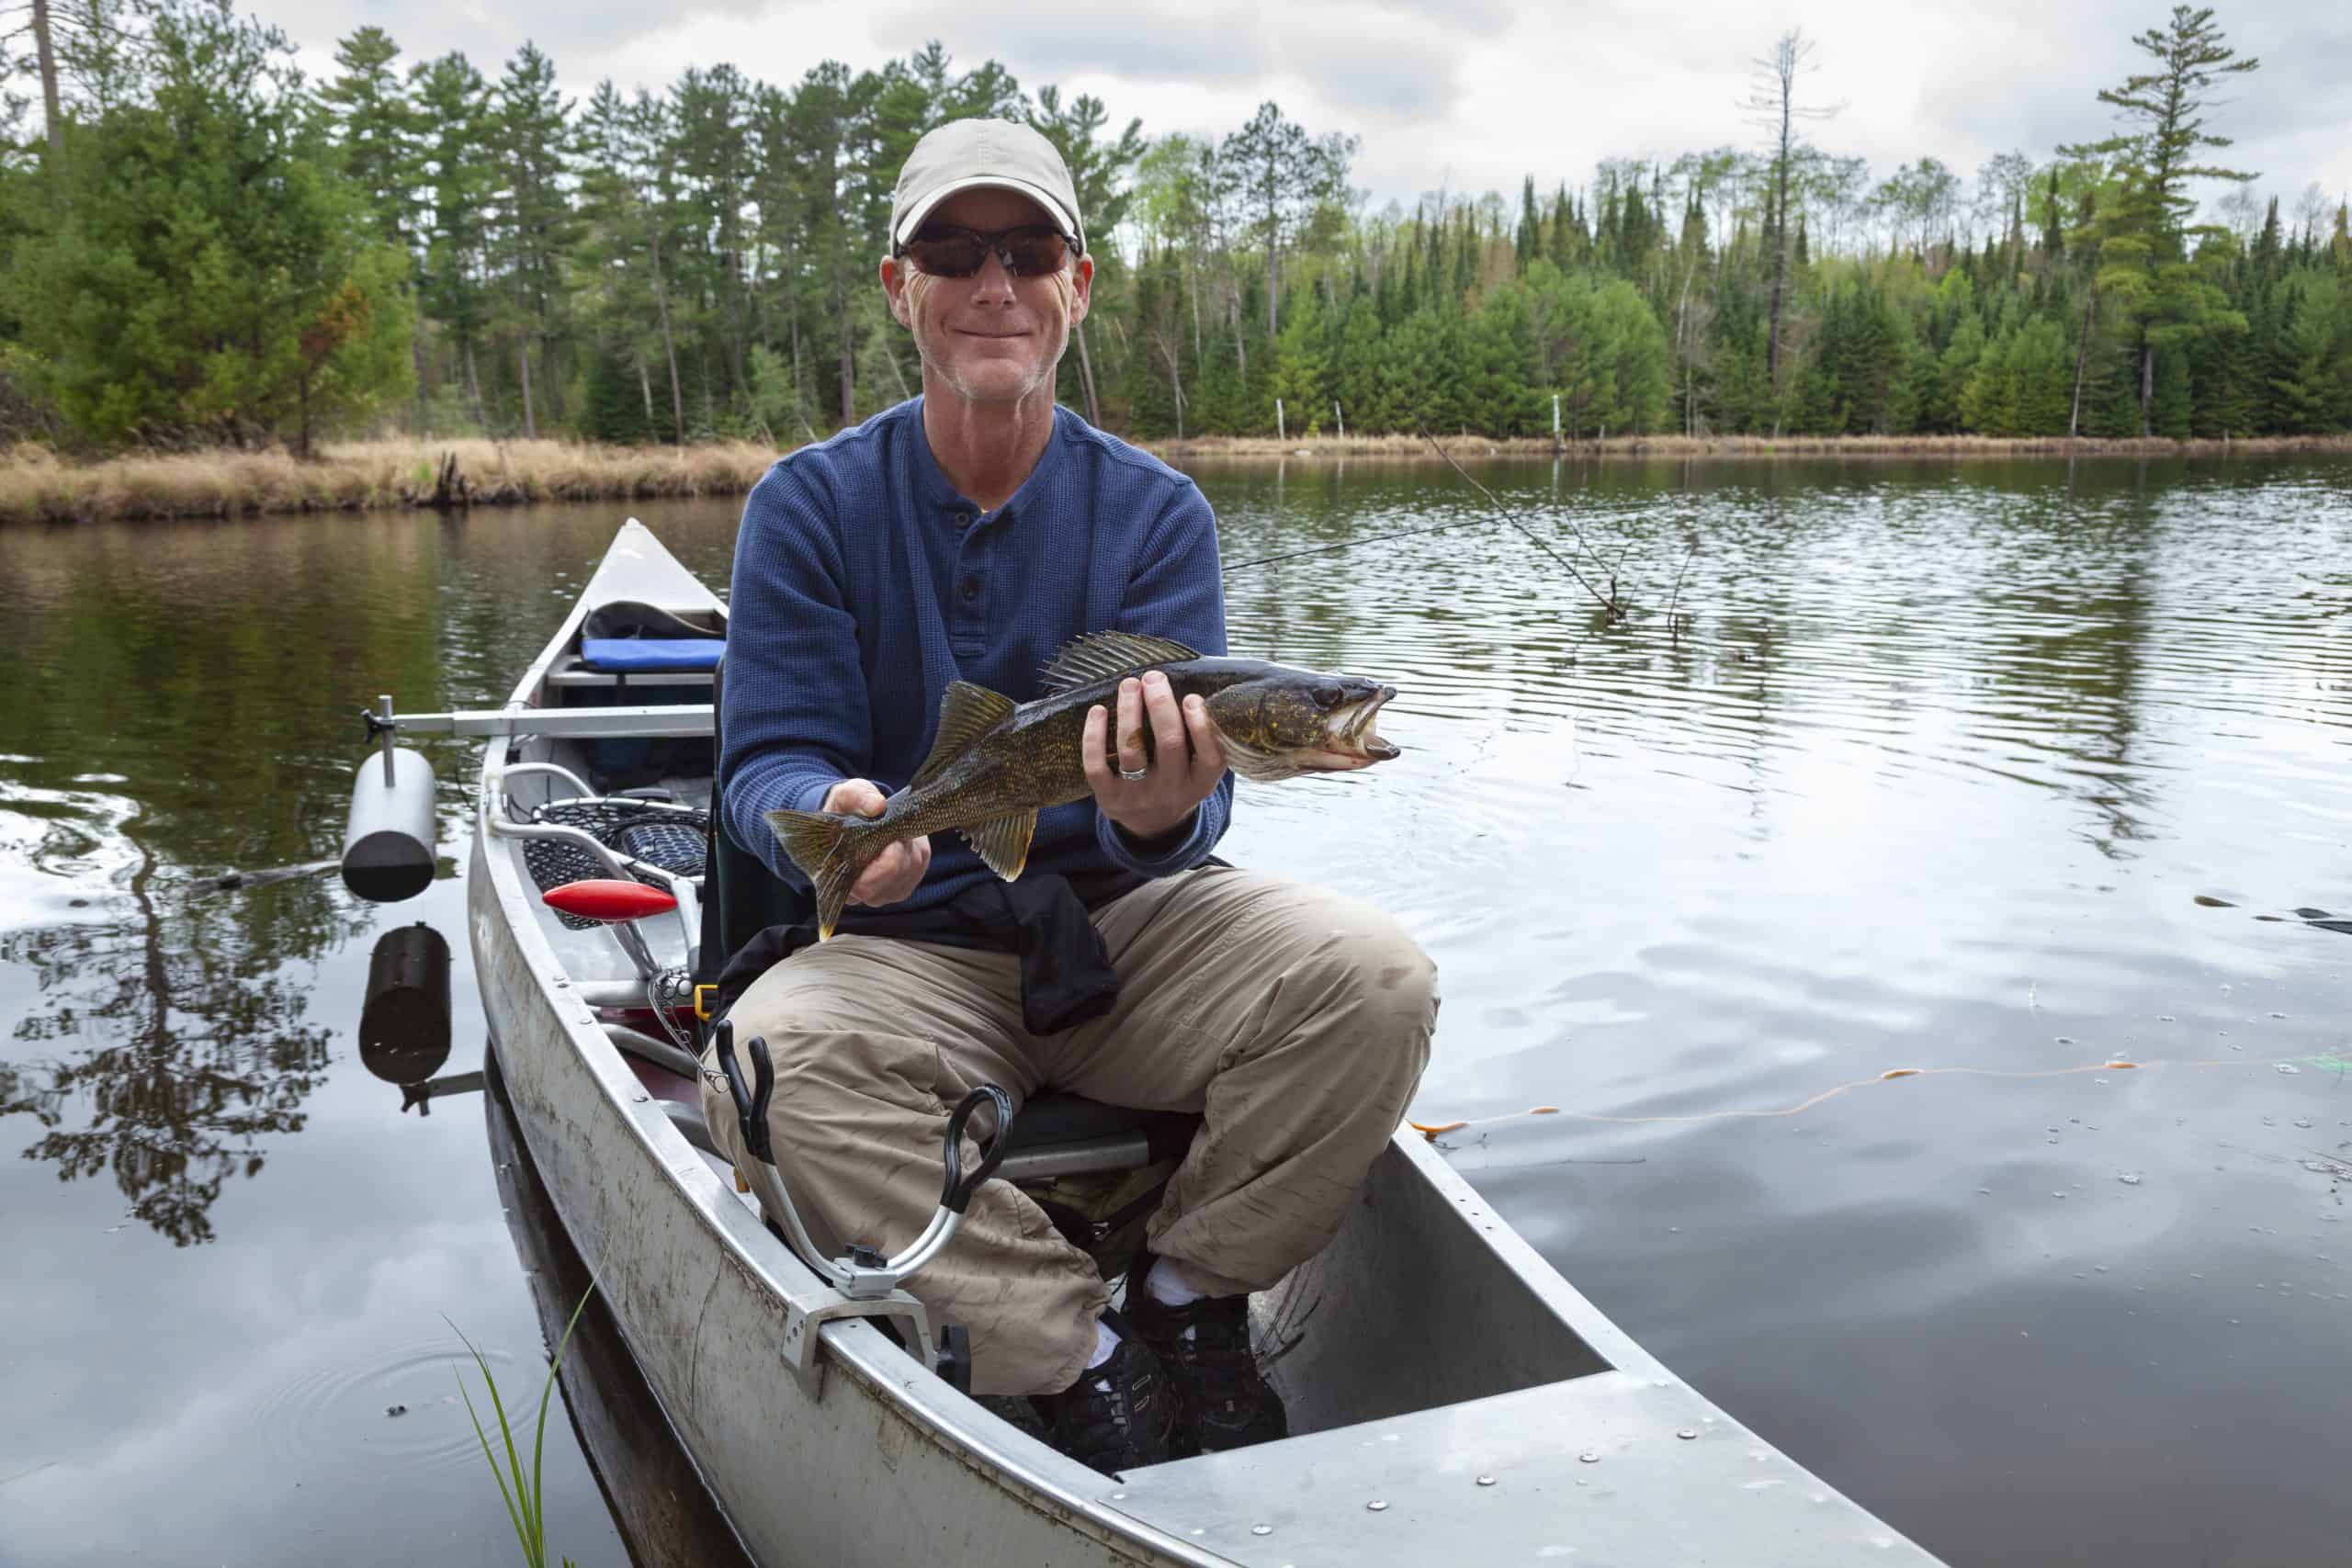 Smiling fisherman sitting in a canoe on a Minnesota lake holds up a walleye